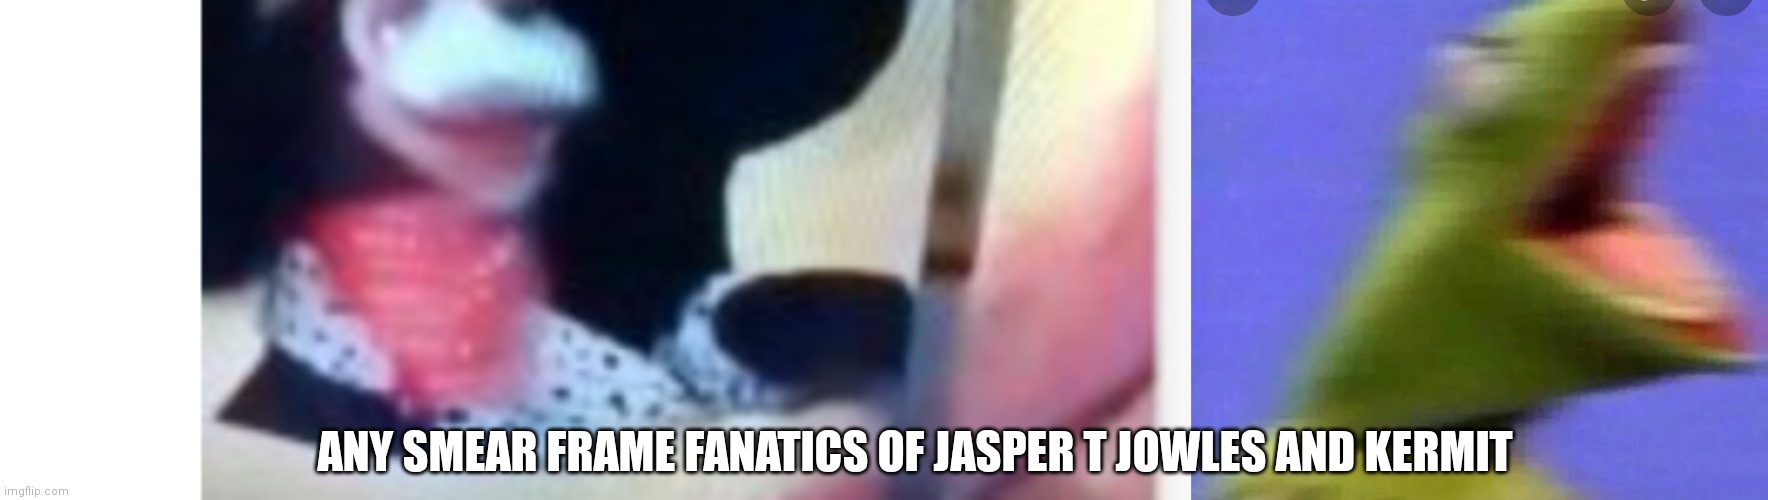 Smear frame Jasper and Kermit | ANY SMEAR FRAME FANATICS OF JASPER T JOWLES AND KERMIT | image tagged in funny memes | made w/ Imgflip meme maker